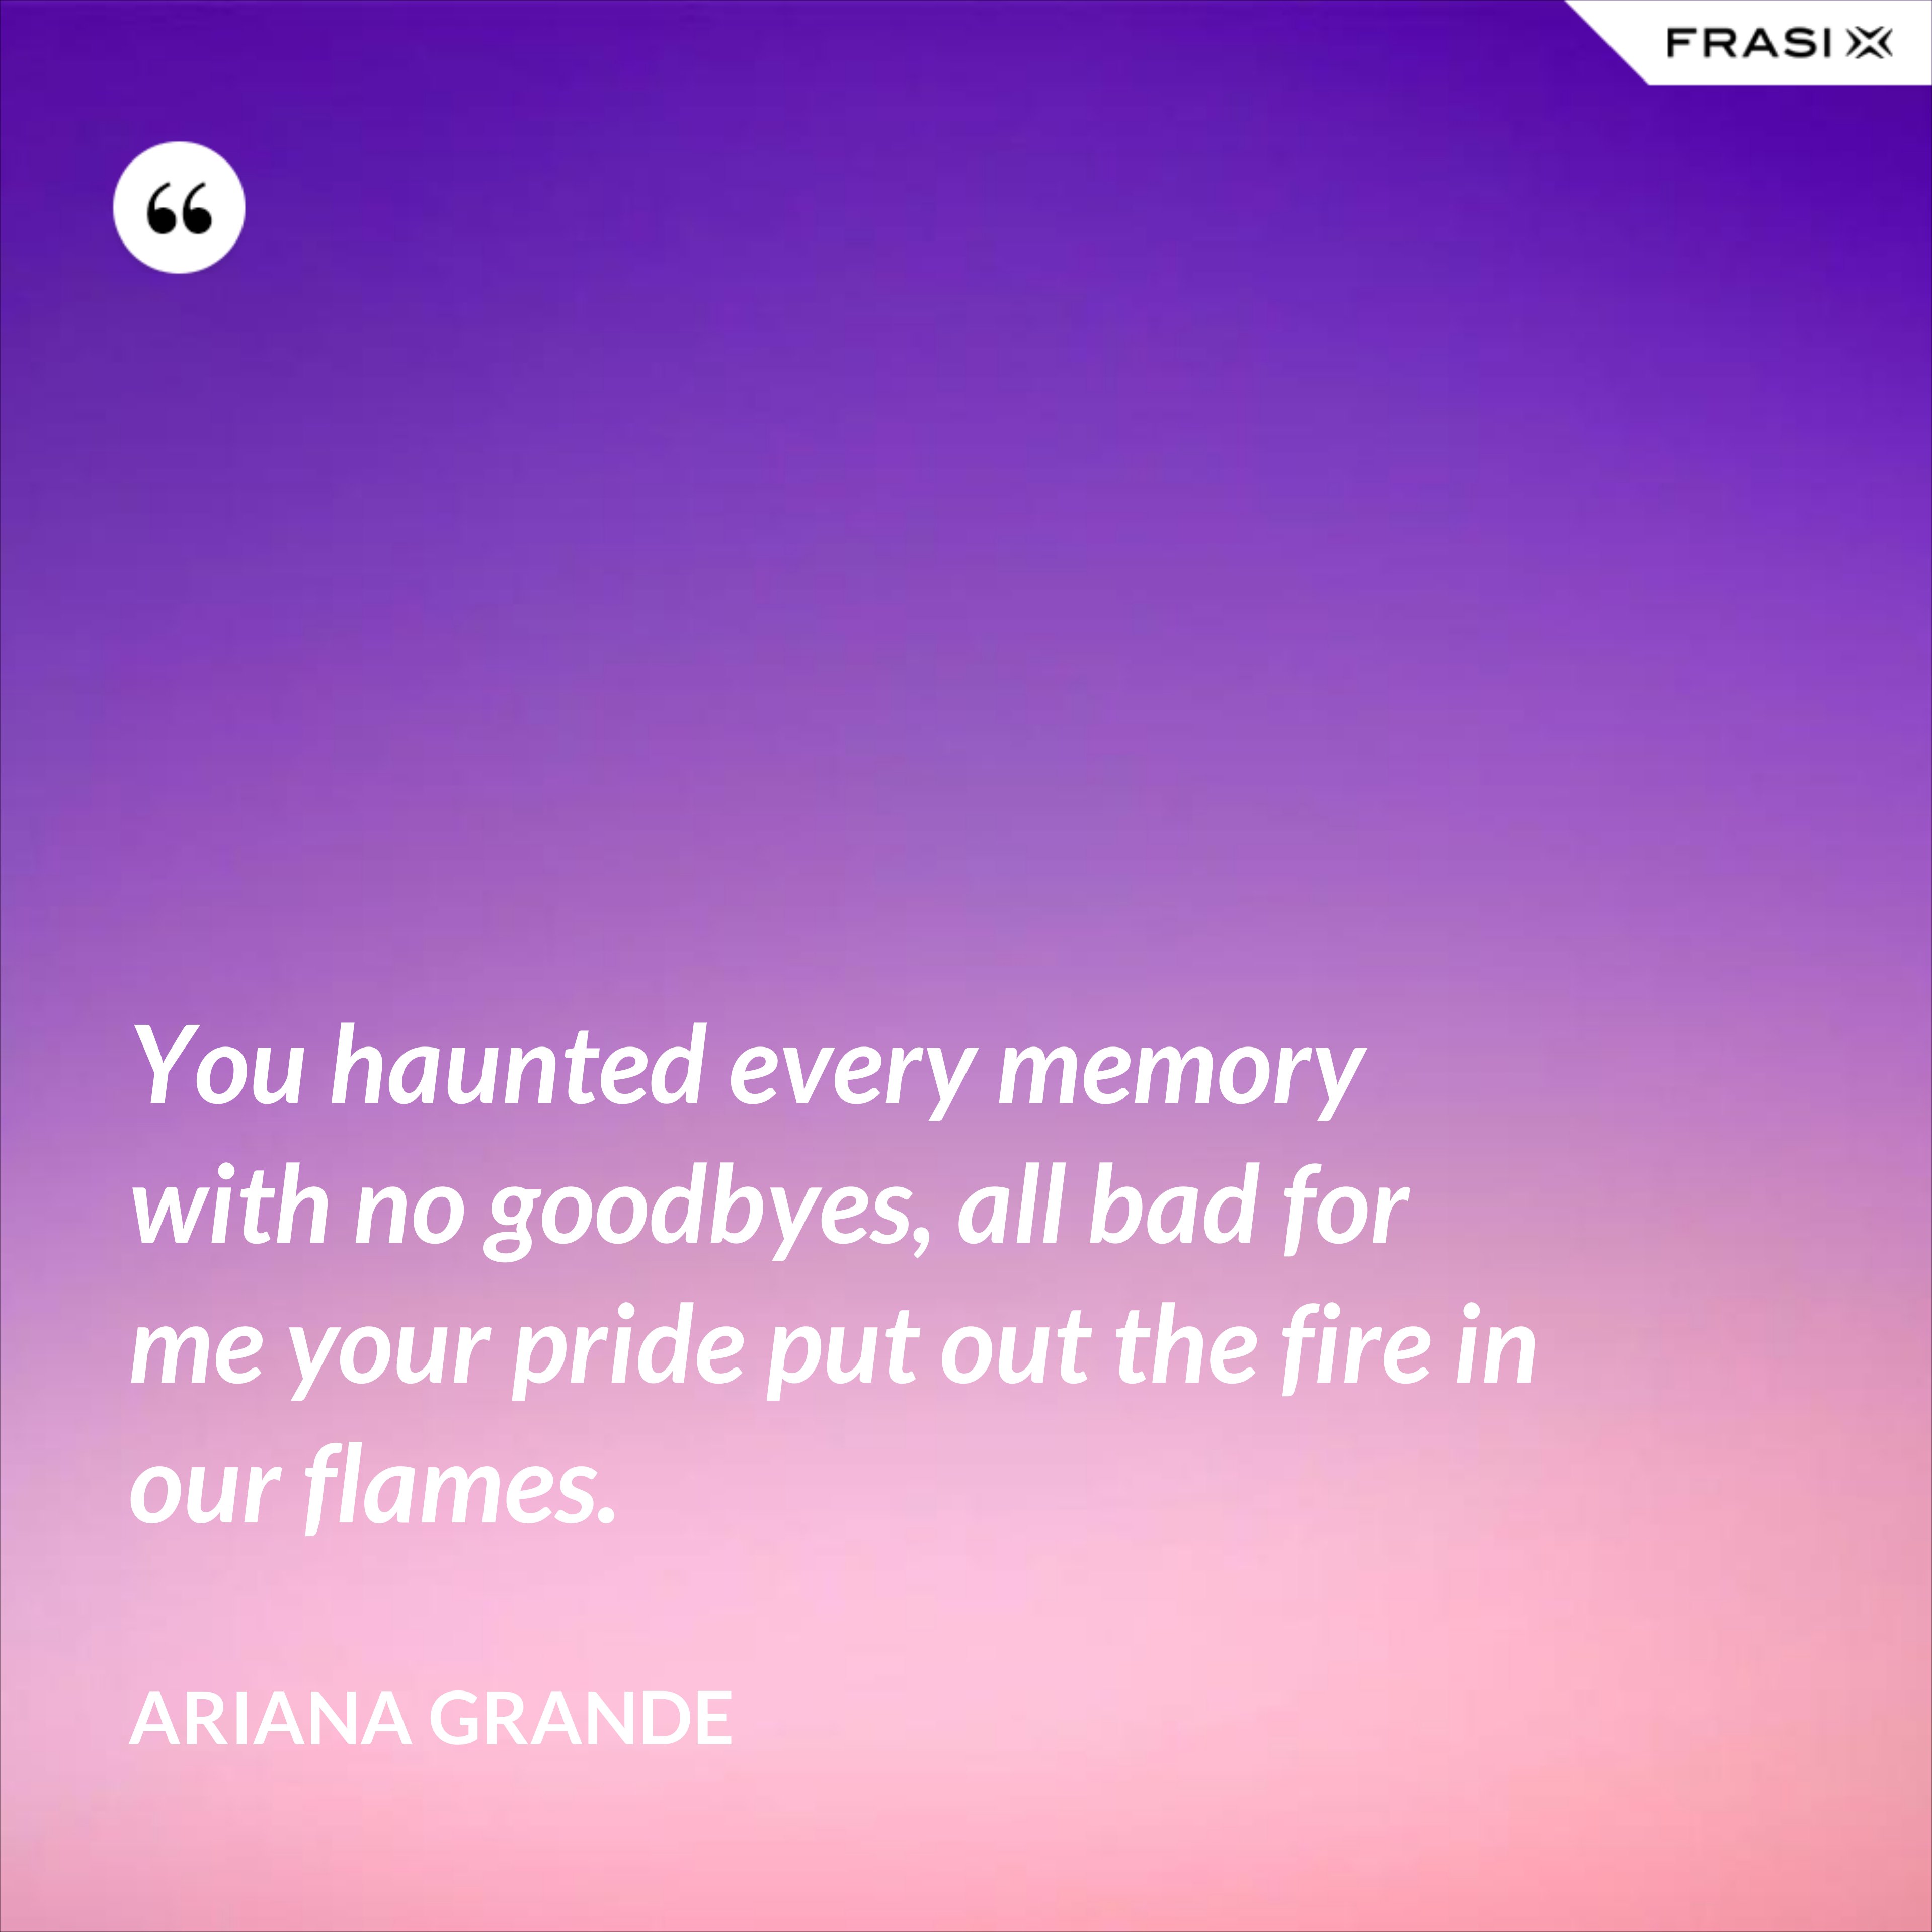 You haunted every memory with no goodbyes, all bad for me your pride put out the fire in our flames. - Ariana Grande